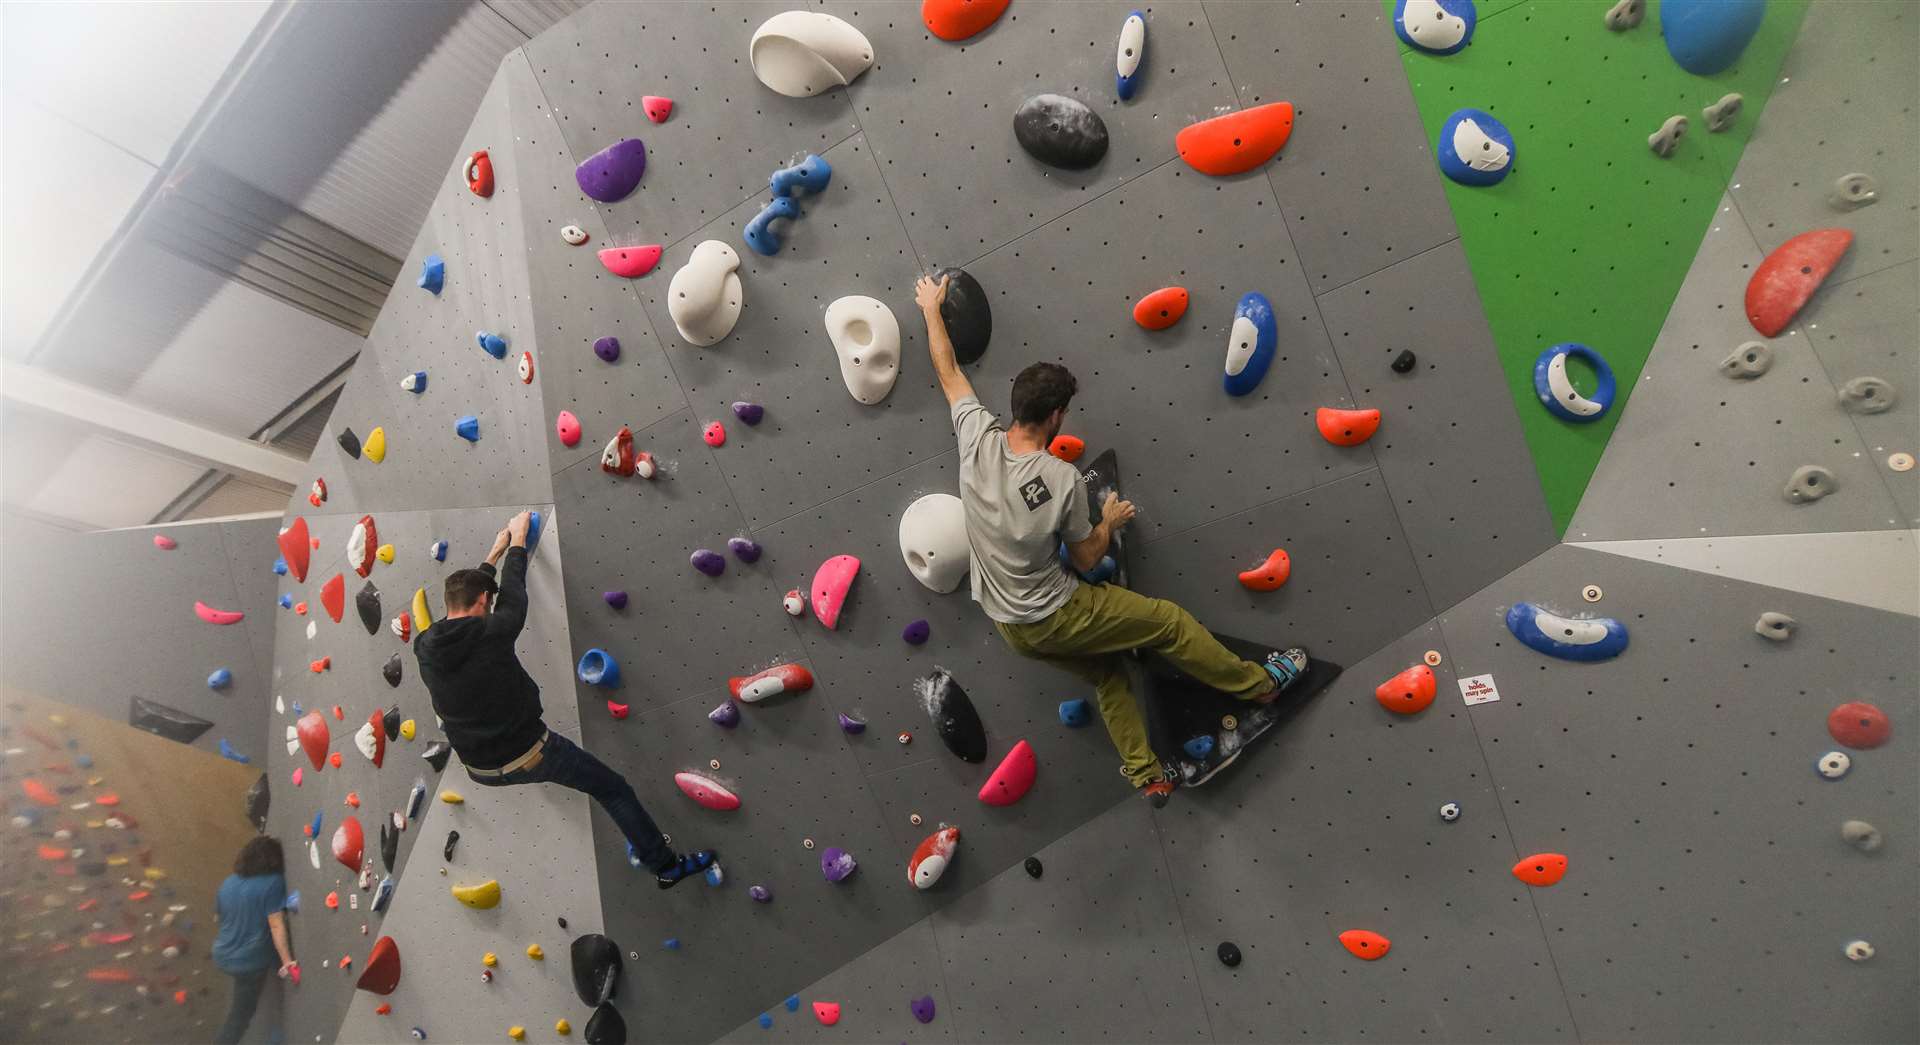 Bouldering is climbing without ropes over safety matting and is a fantastic way to get fit. But there is a lot more to it than just upper body strength.